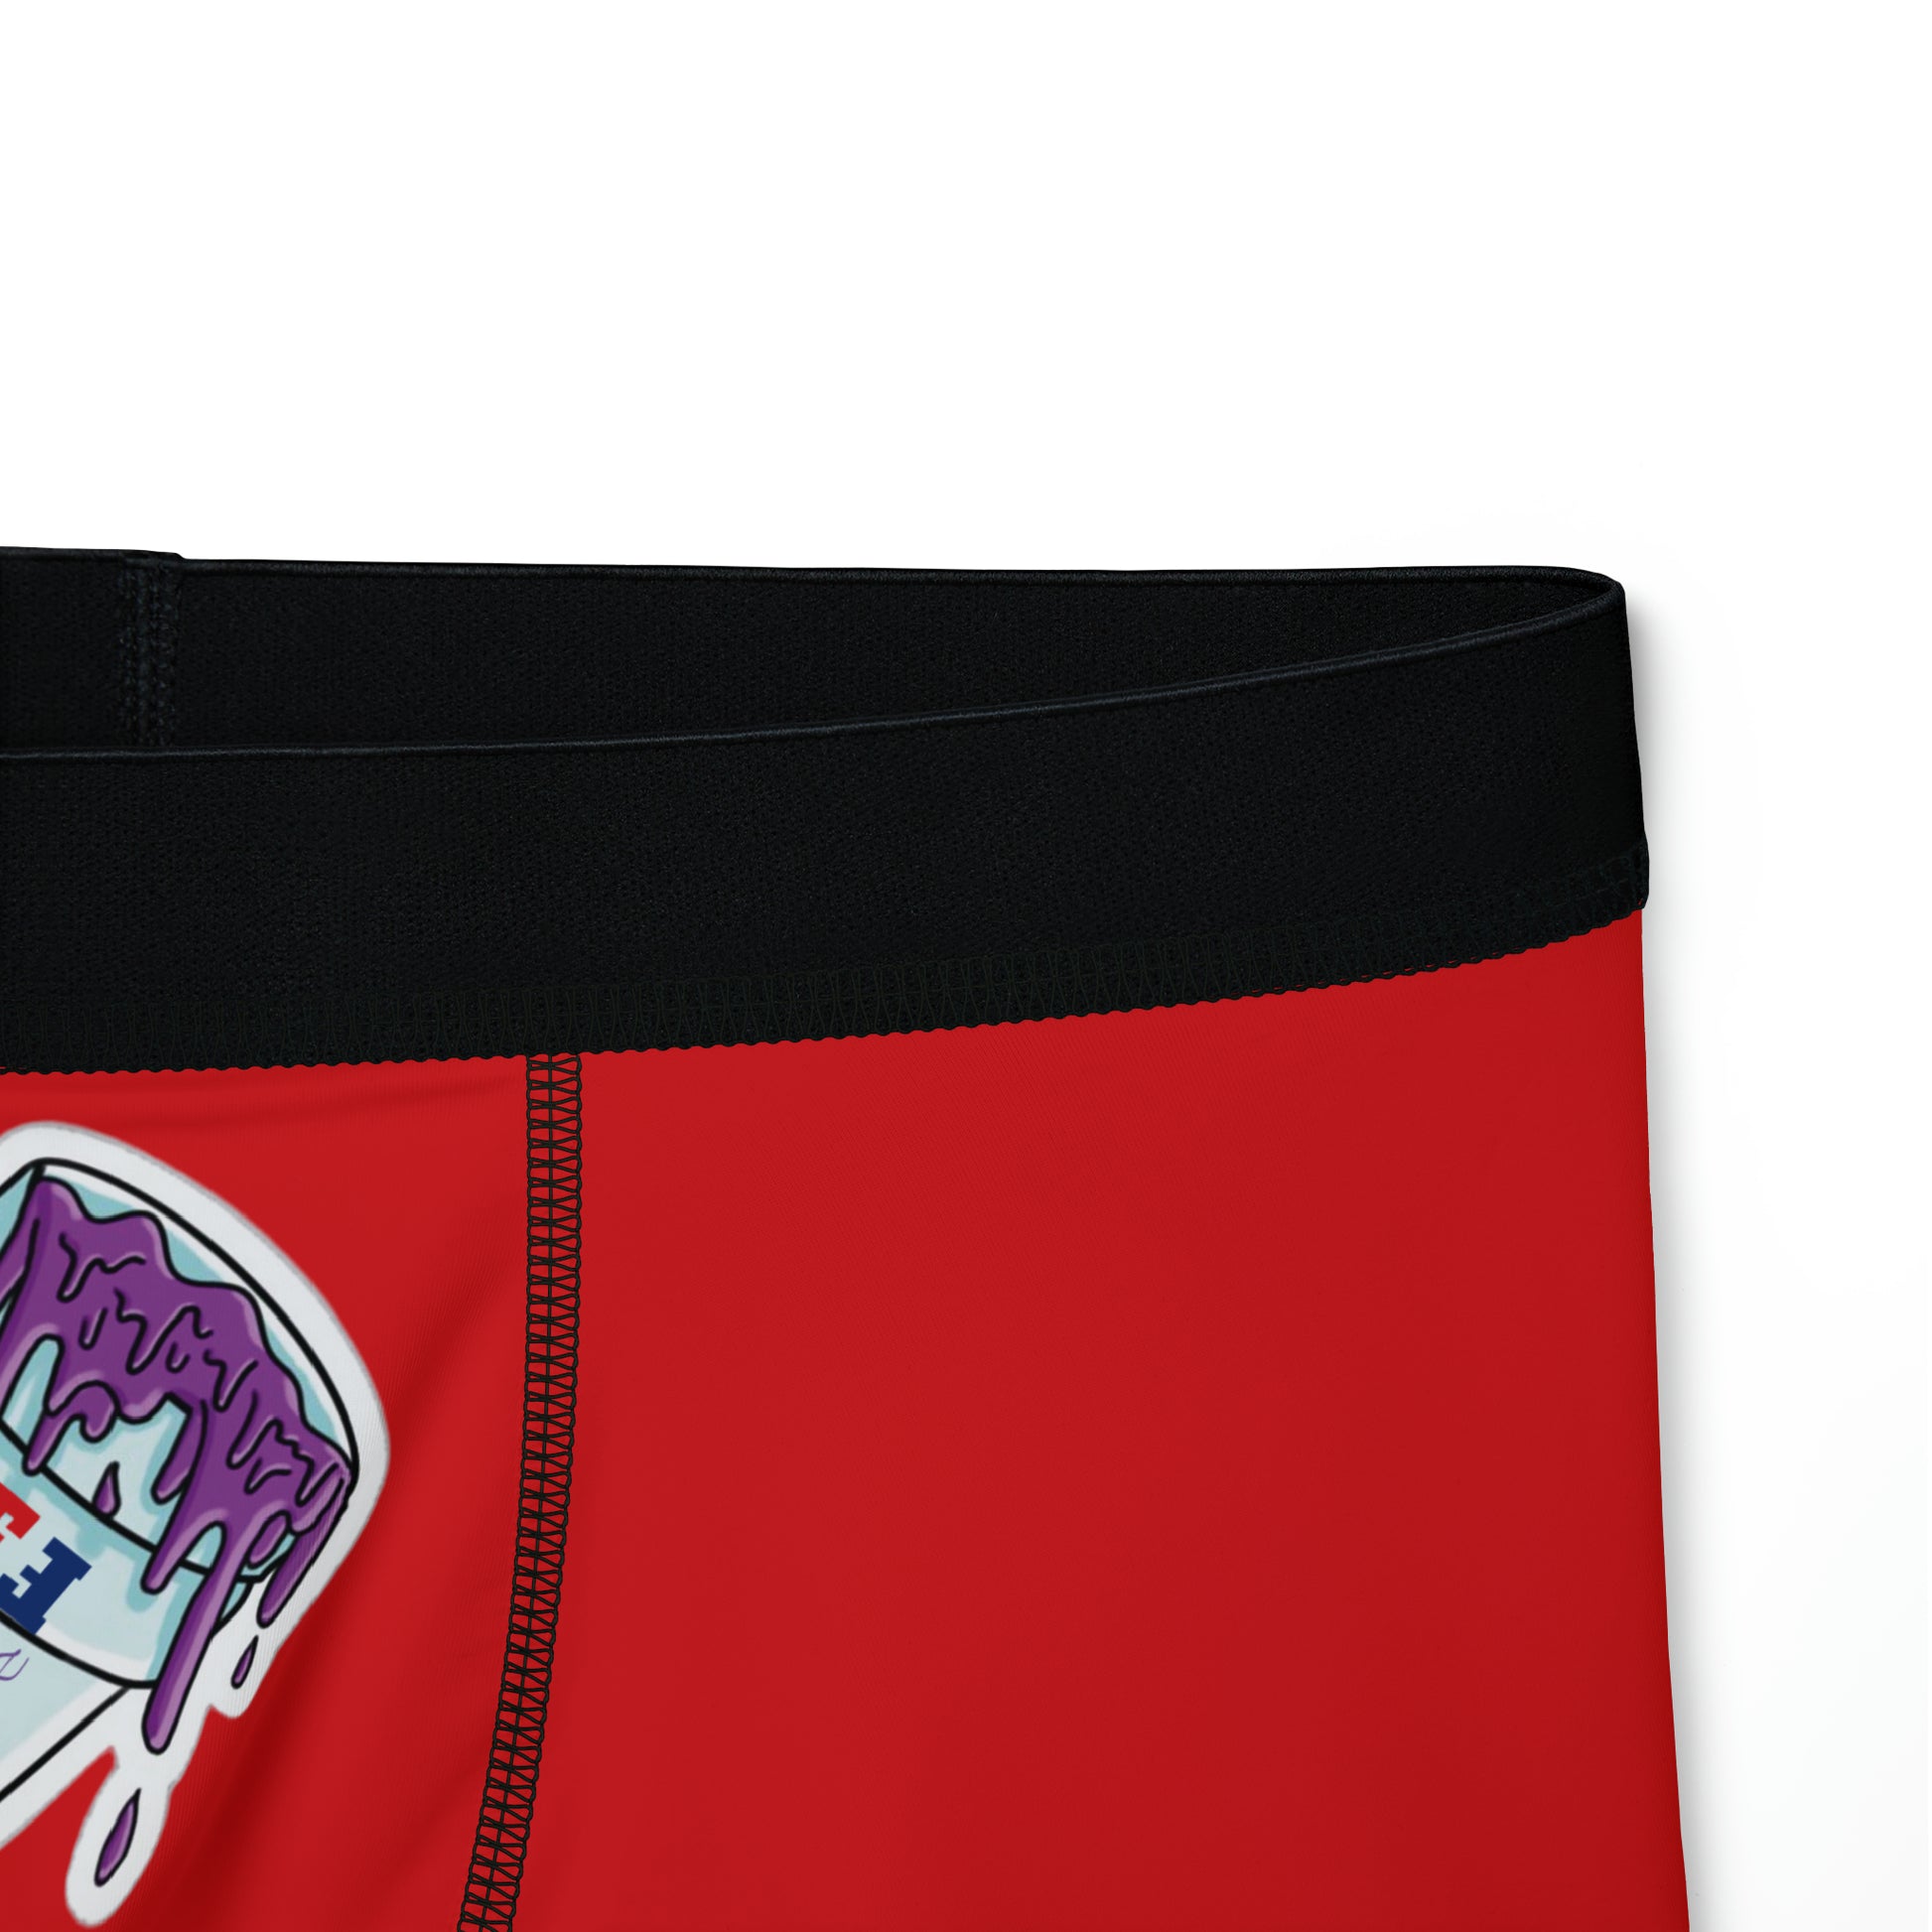 WILKYsAll Over PrintsMen's Boxers (AOP)These personalized men's boxers feature a highly comfy, scratch-free fabric blend that's 92% polyester and 8% spandex that is stretchy and soft to the skin. All boxe